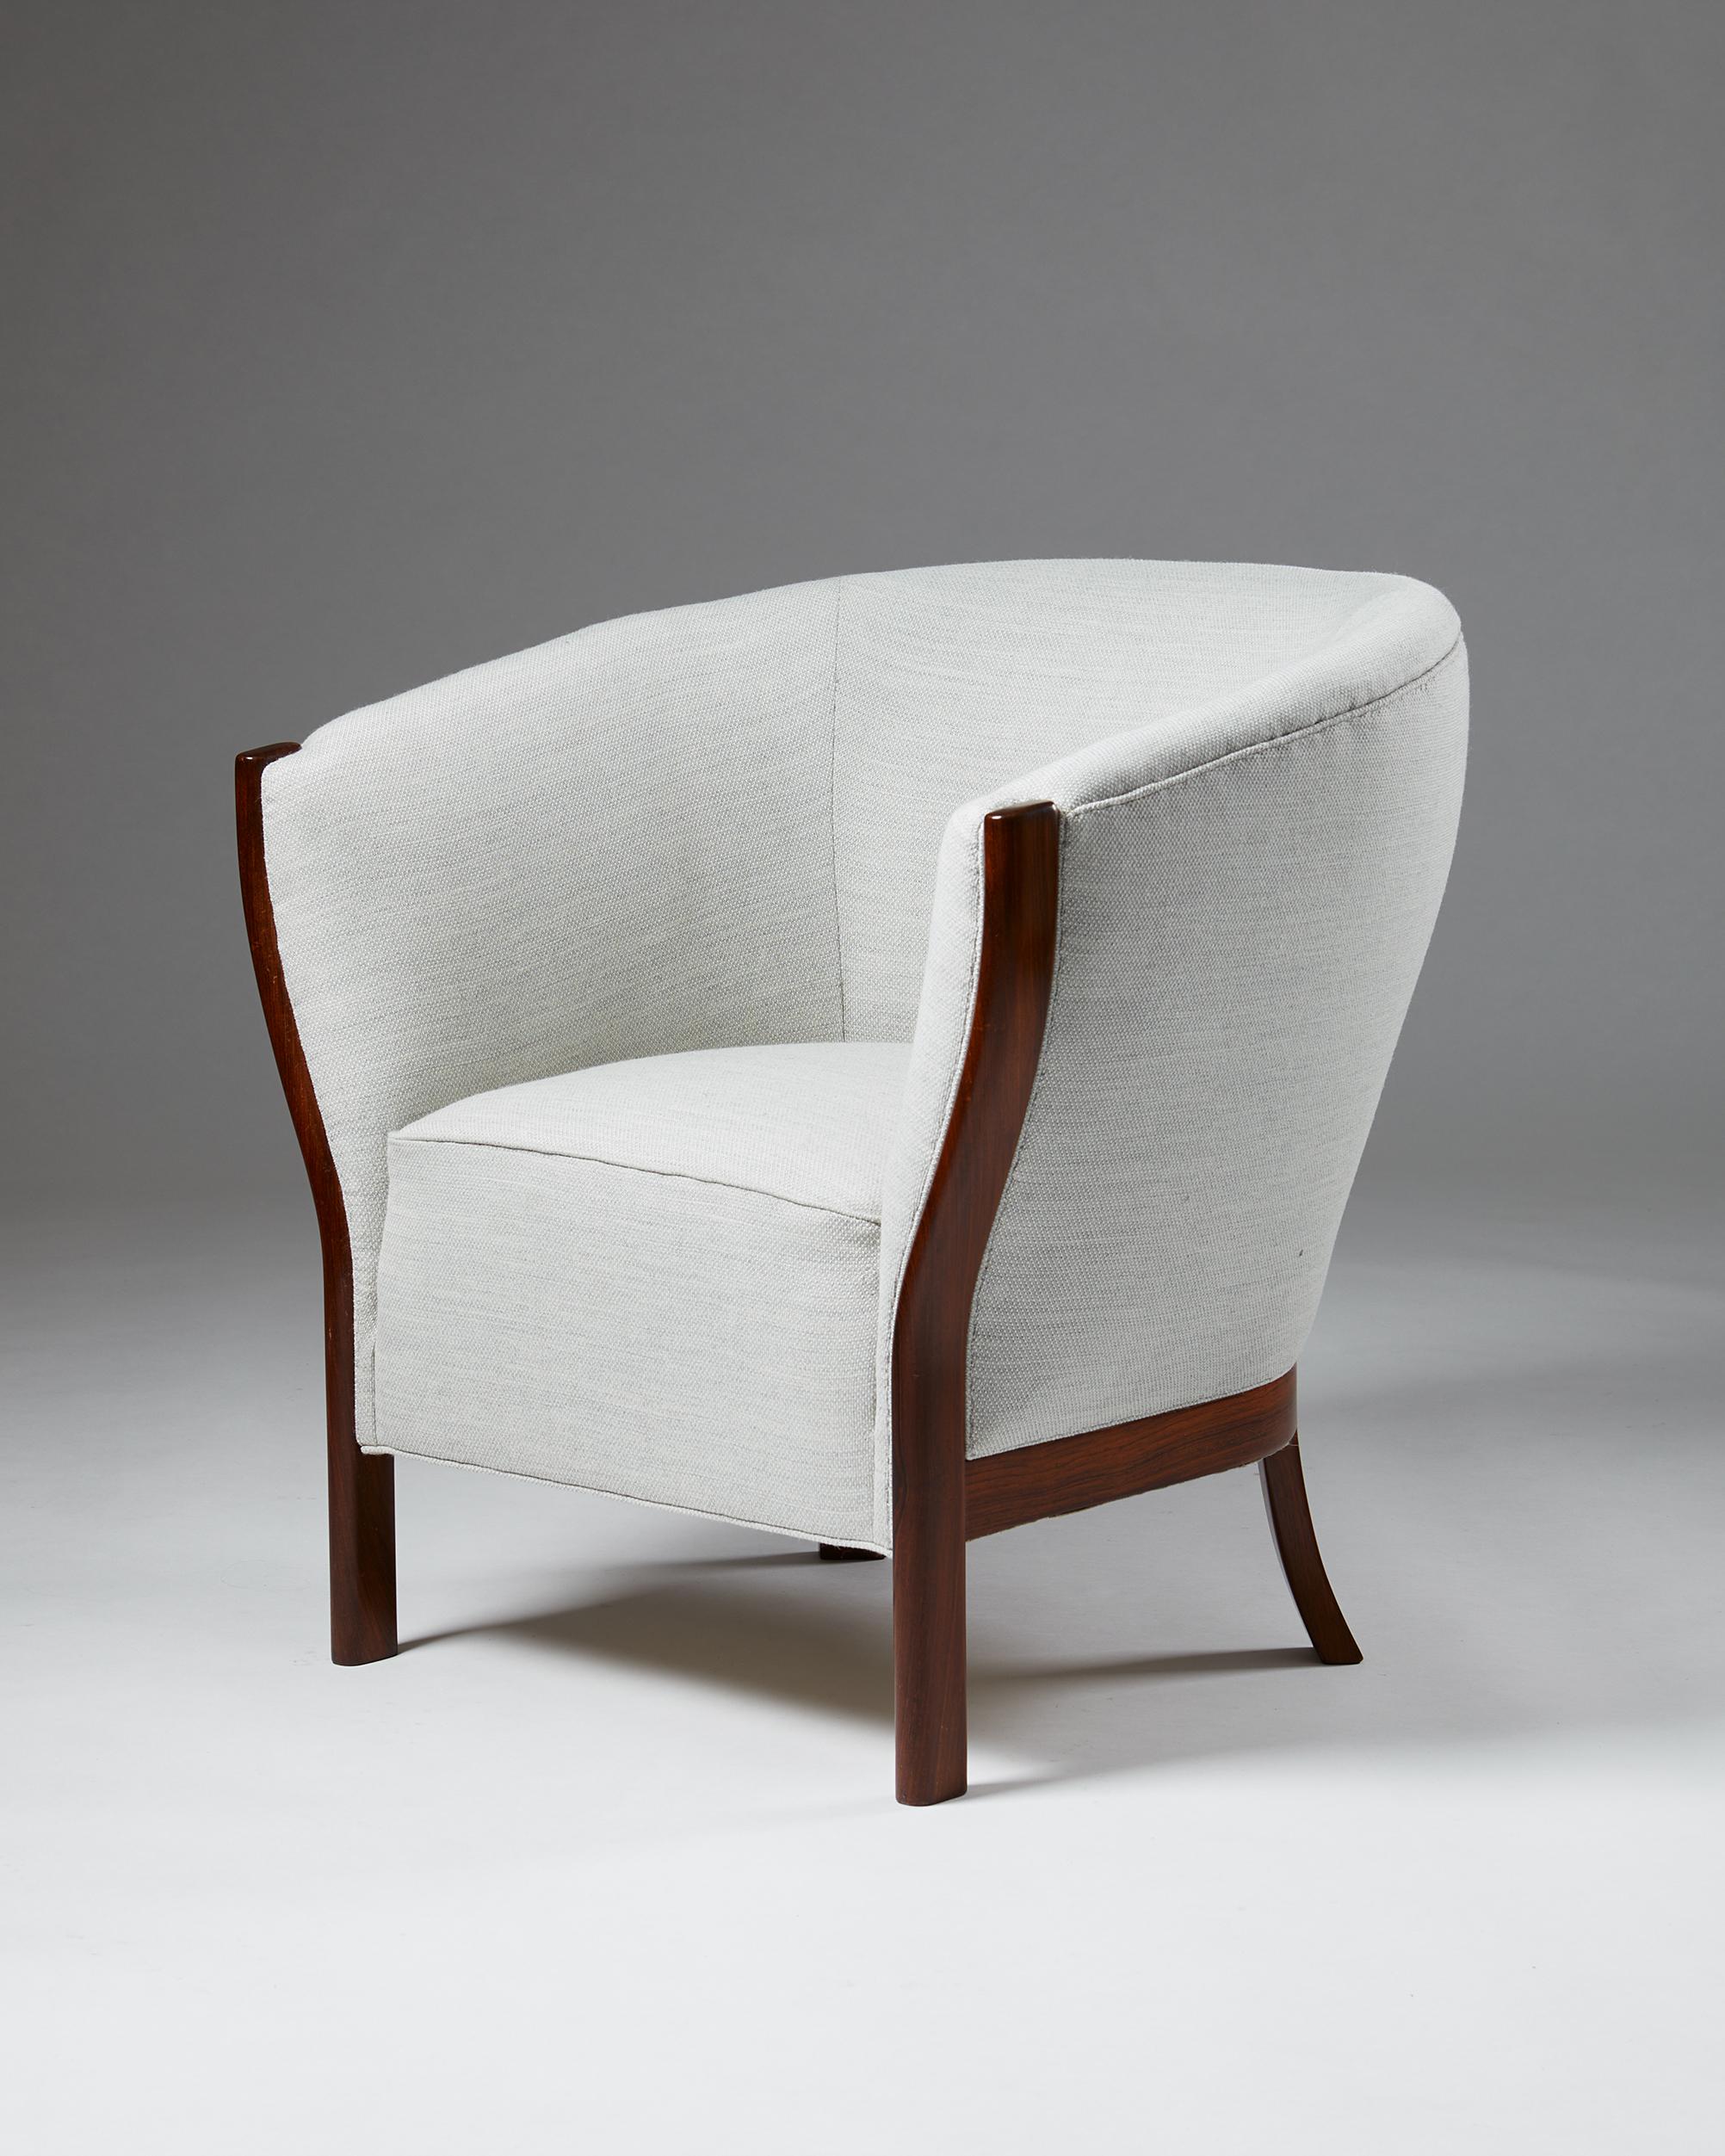 Upholstery Set of Three Unique Easy Chairs Designed by Frits Schlegel, Denmark, 1949 For Sale